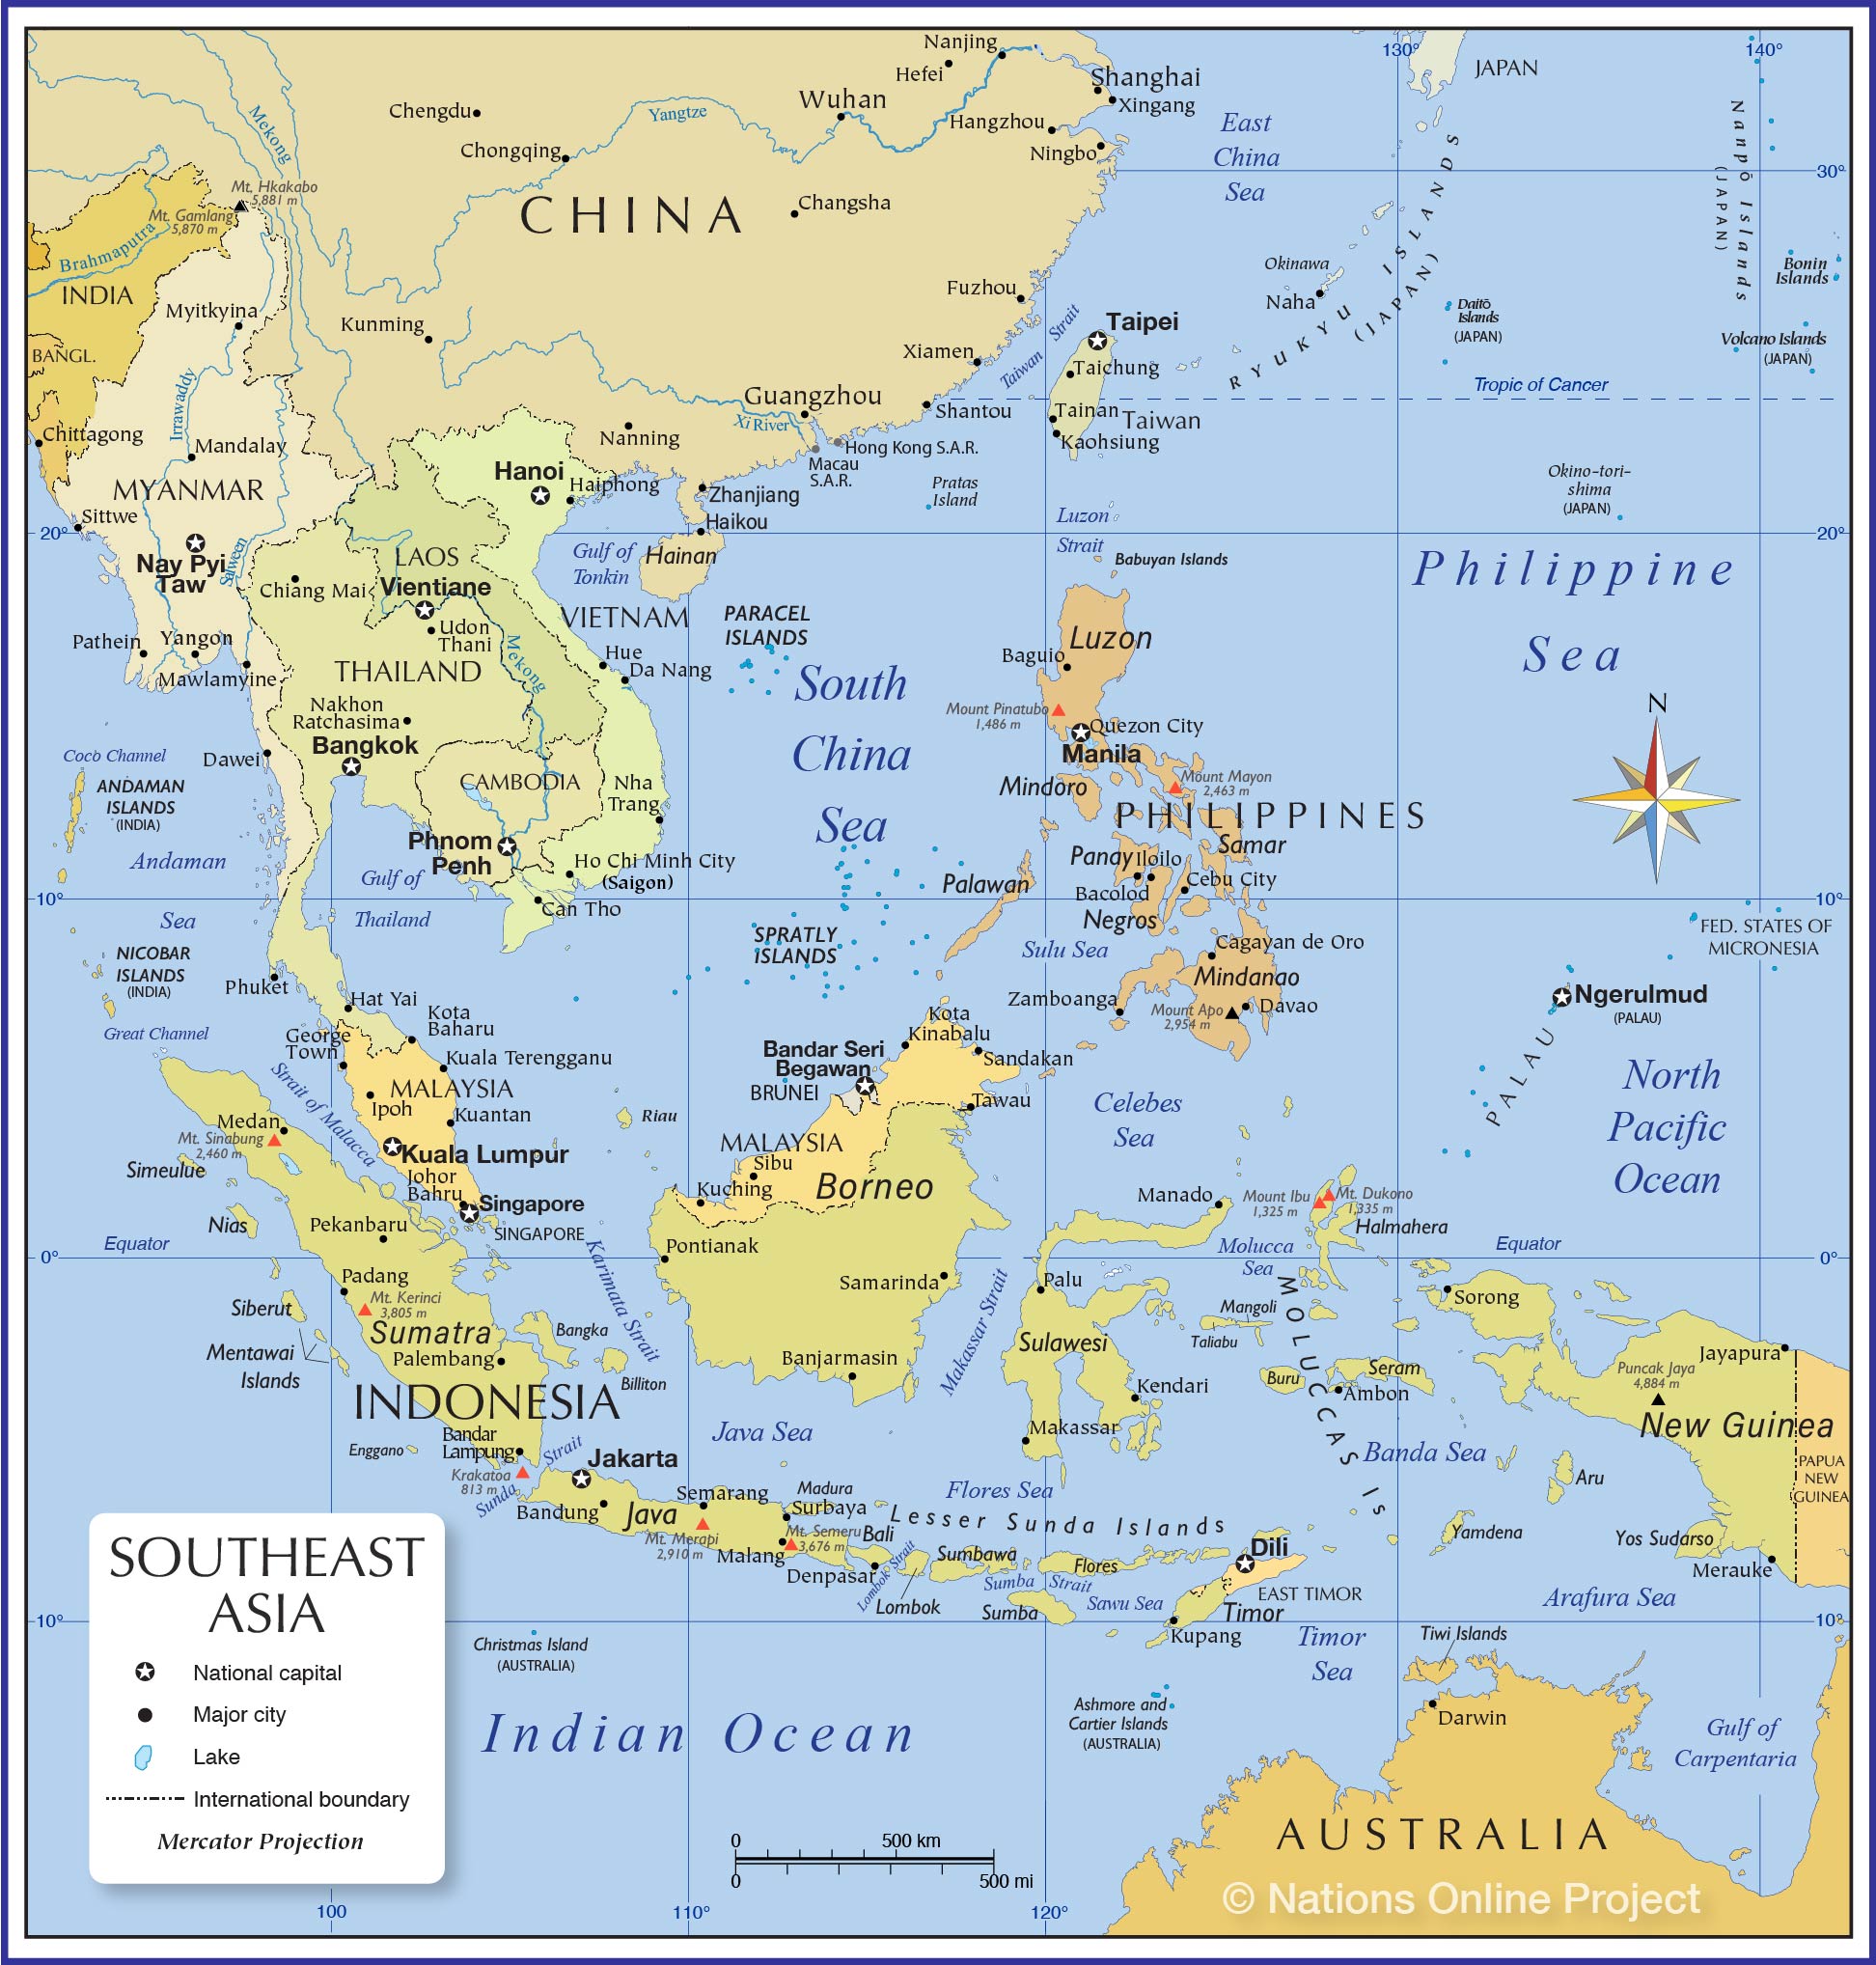 Map of South-East Asia - Nations Online Project